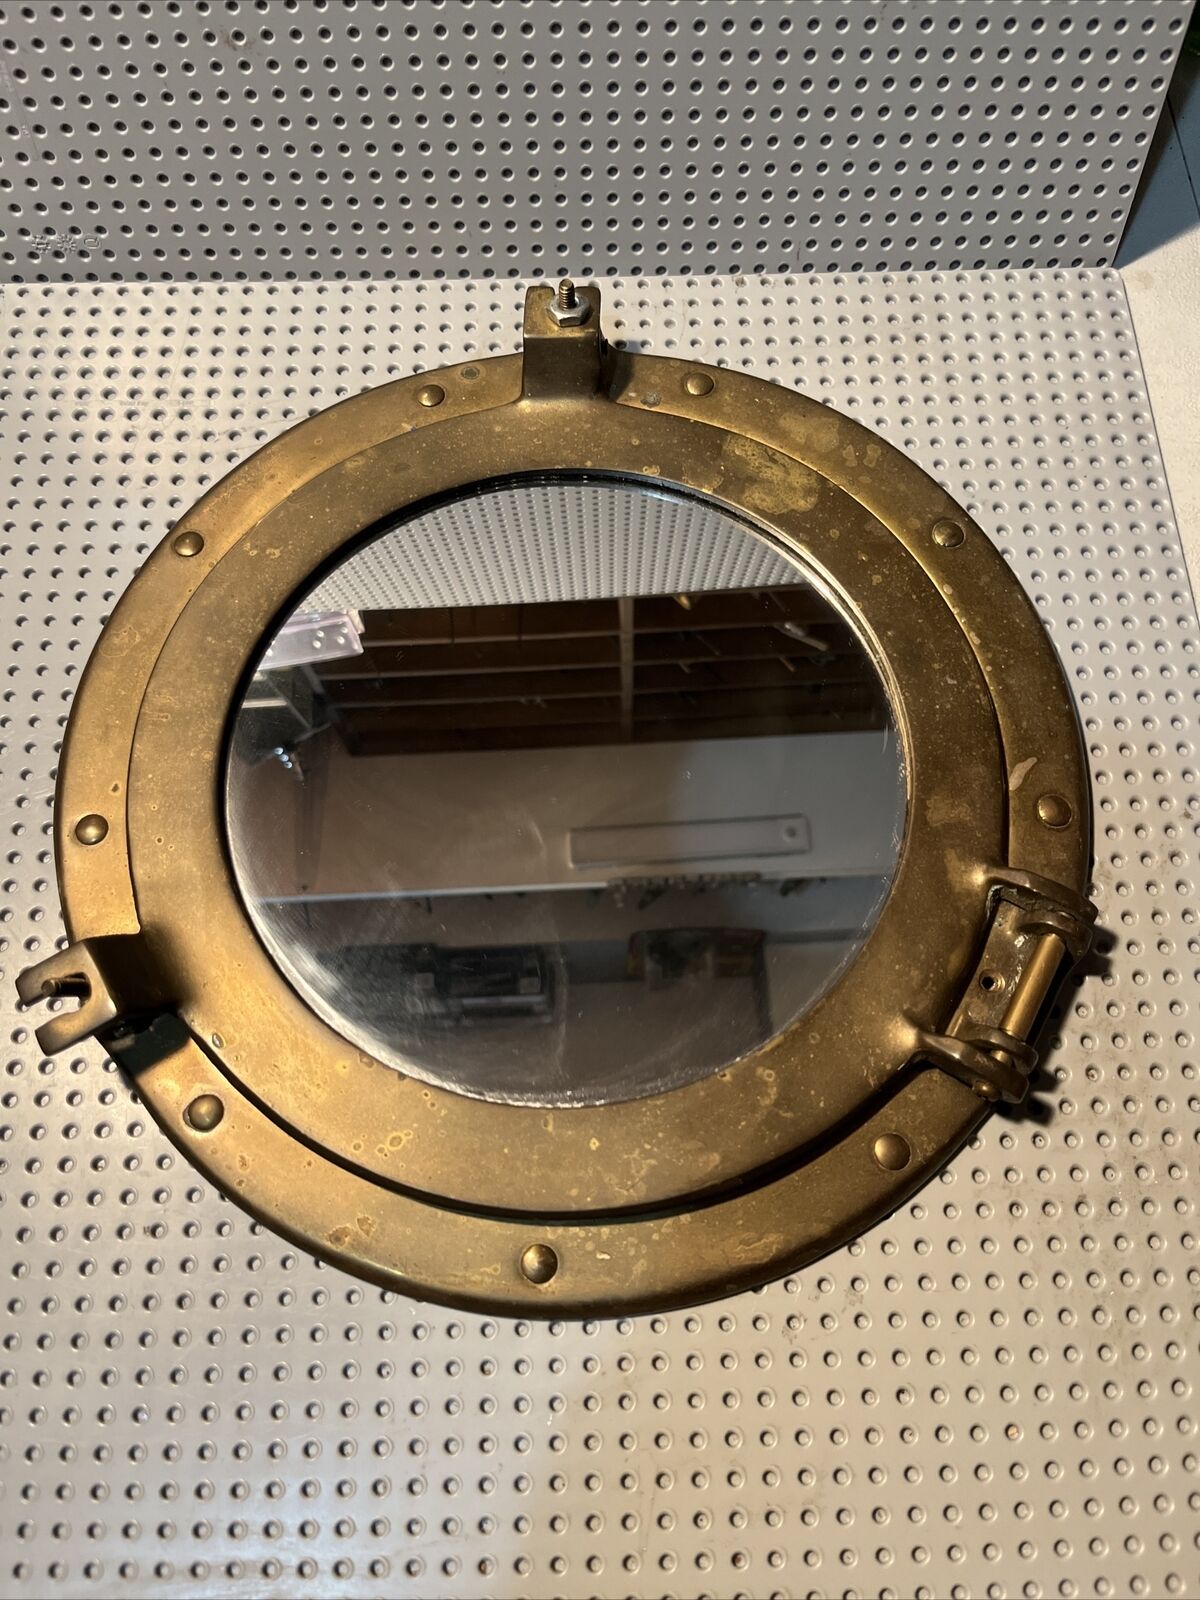 11” Porthole Nautical Cabin Wall Decor Mirror Antique Brass Finish- Weighs 3lbs